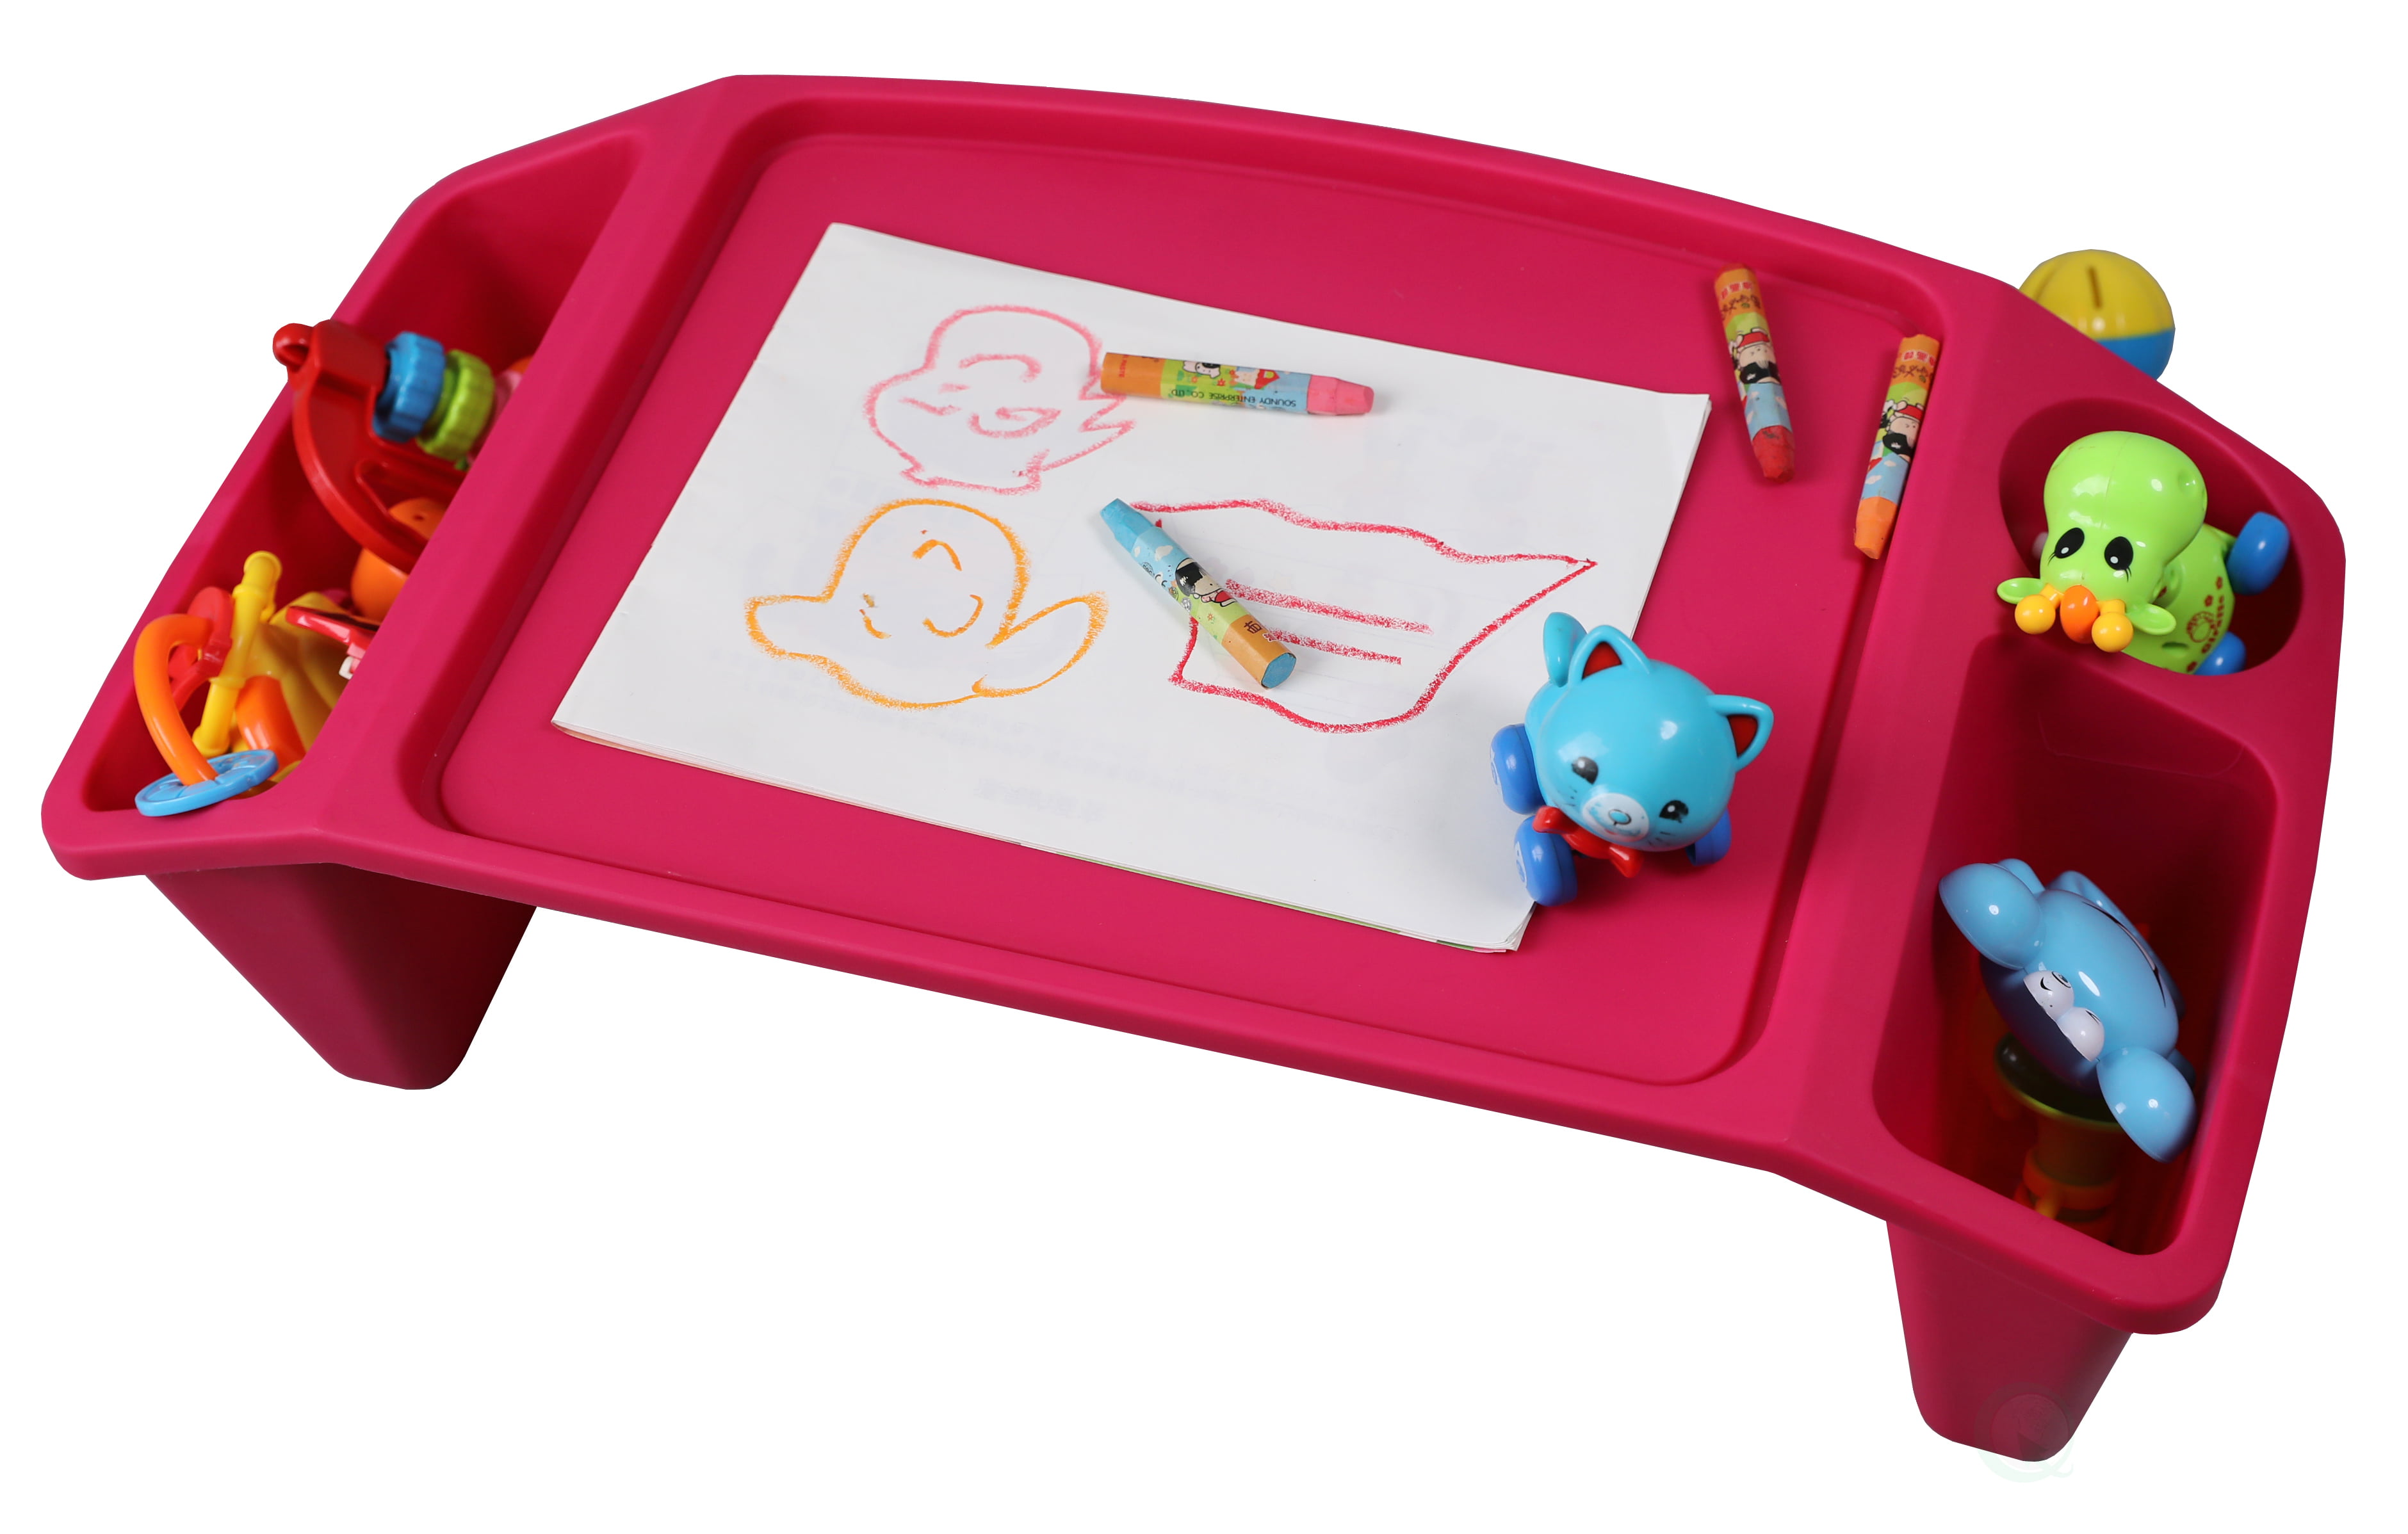 Smooth Trek Kid's Travel Tray Children's Lap Activity Table with Cup Holder 